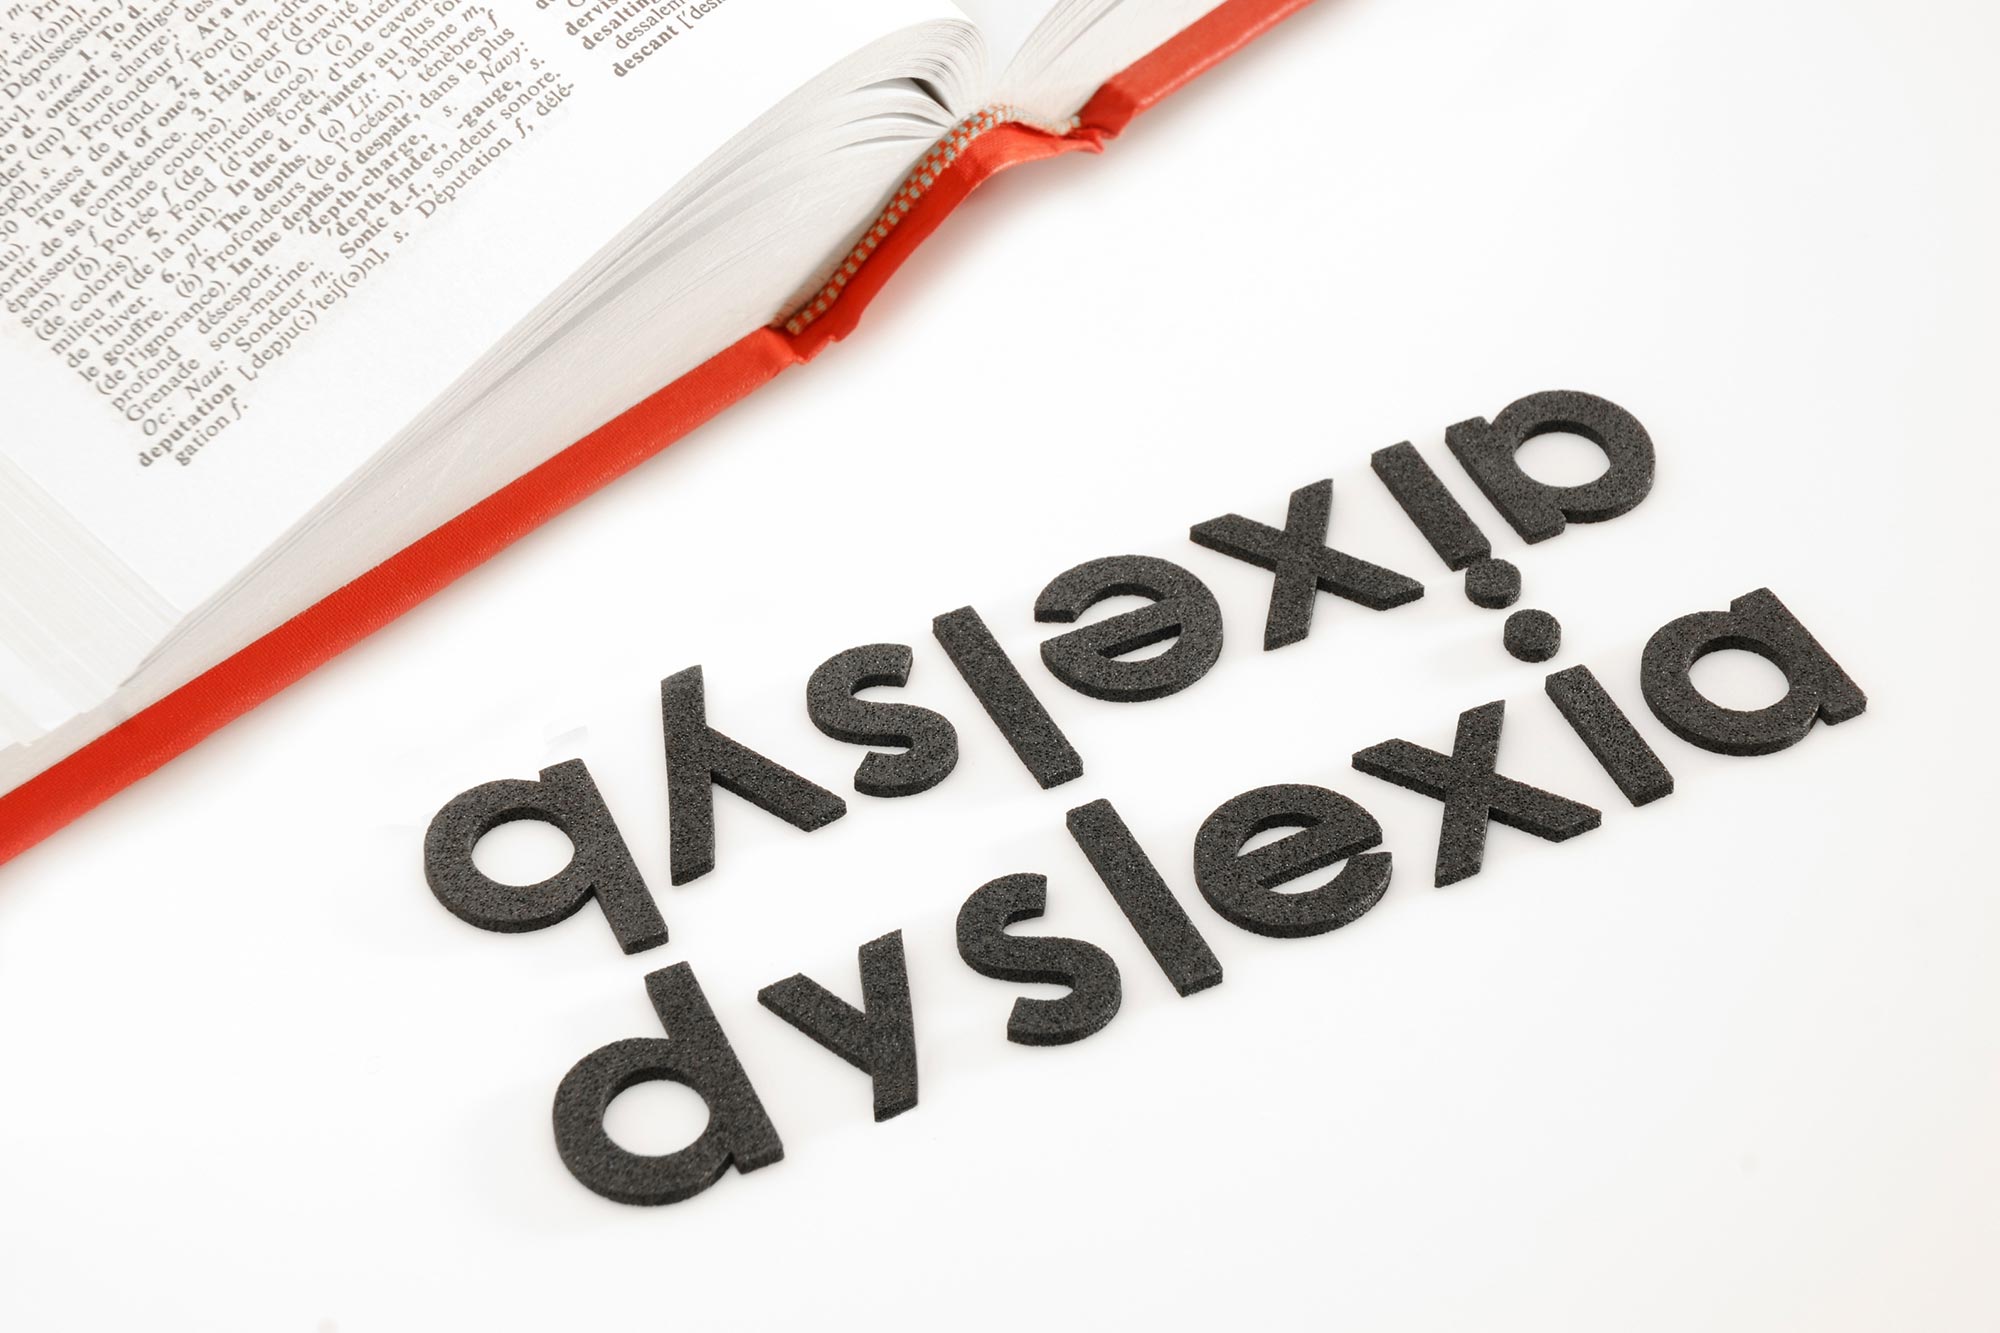 Overlooked Strengths of Dyslexia – Essential to Human Adaptive Success - SciTechDaily